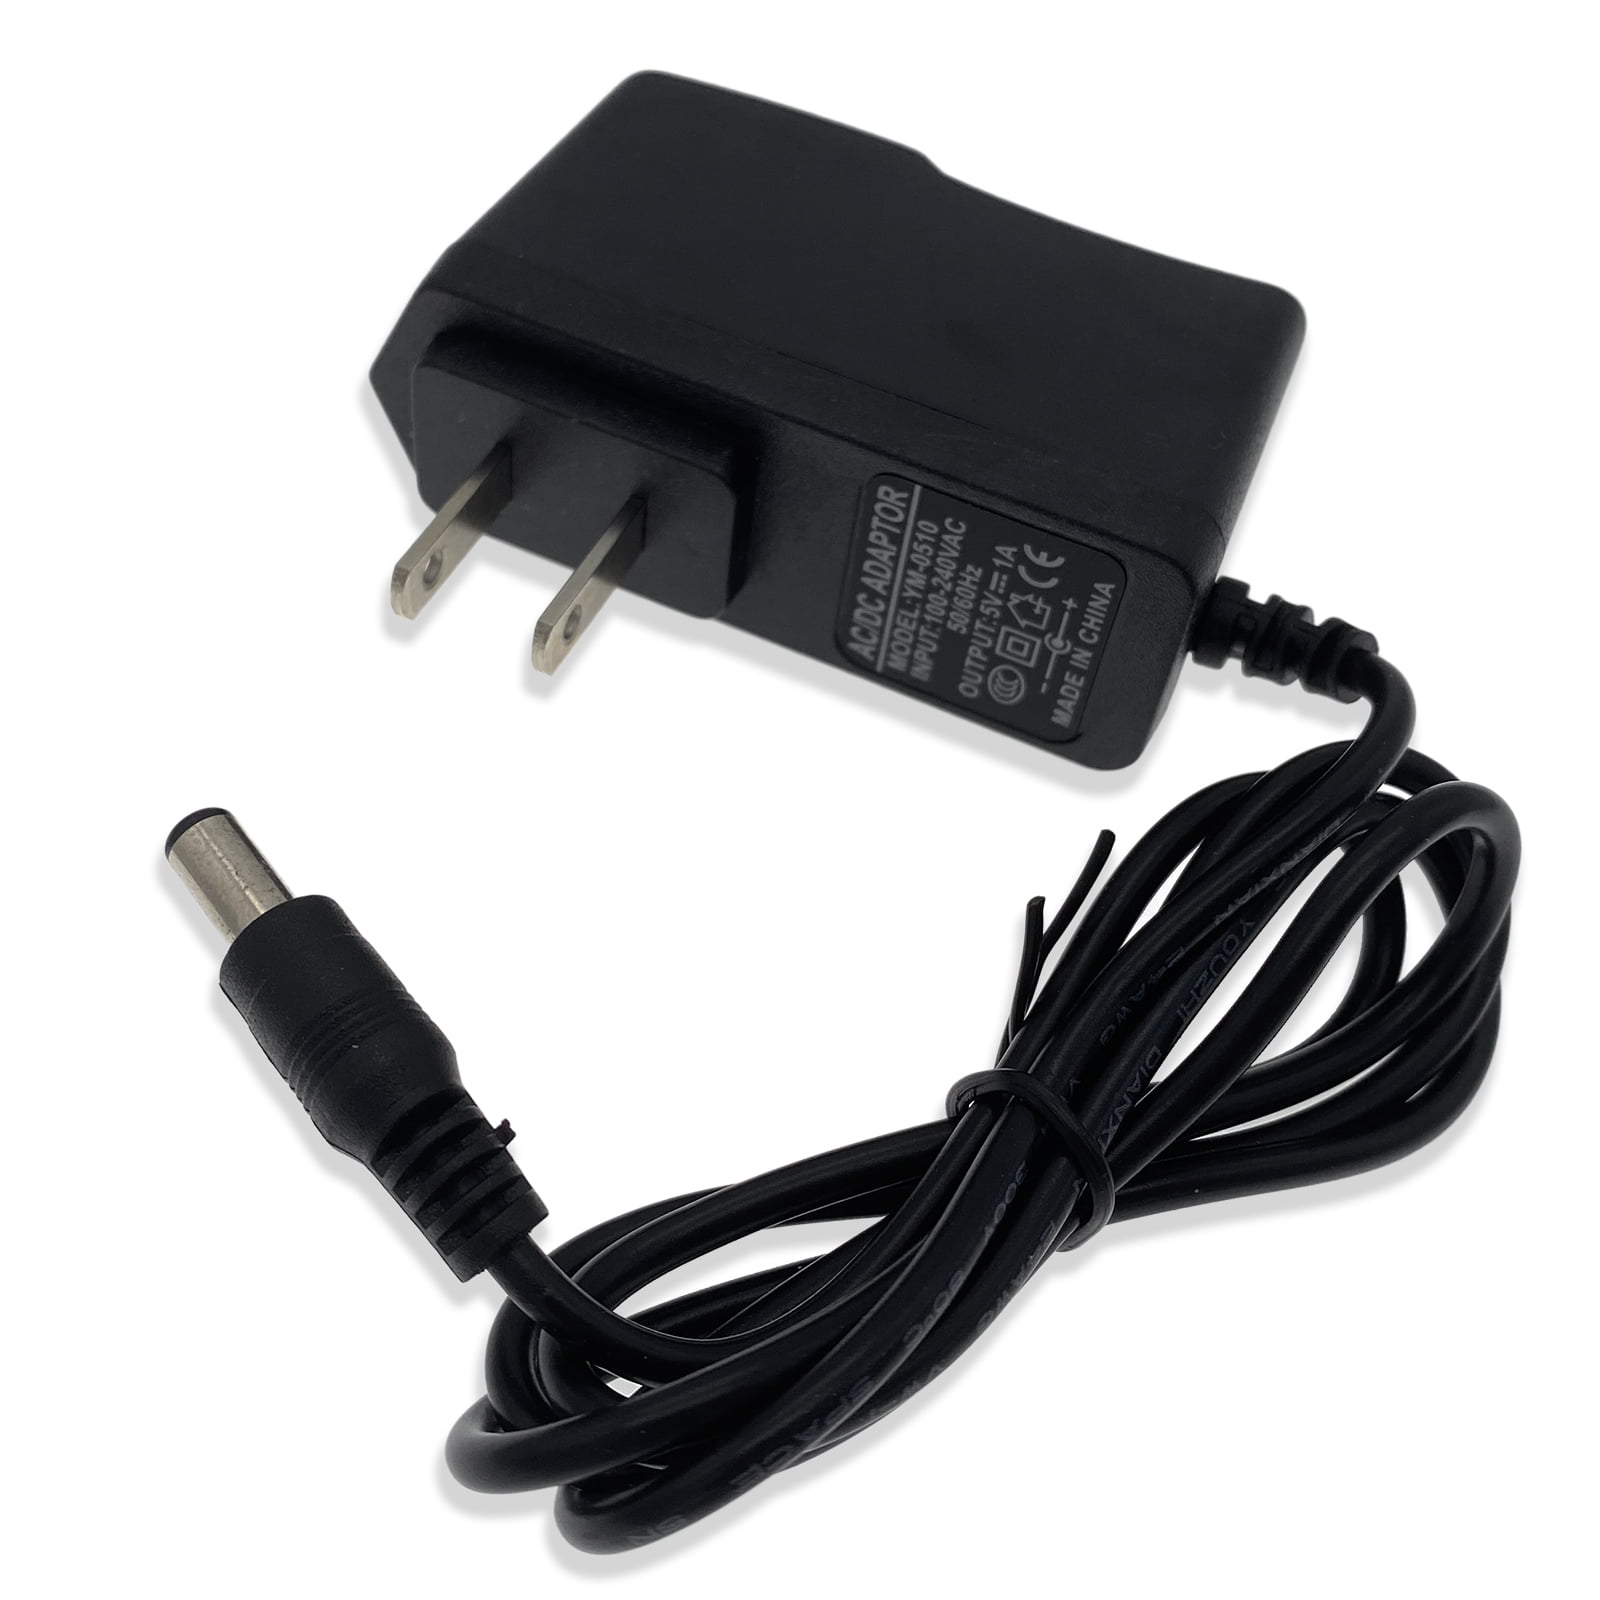  5V 1A AC Adapter, Waysse 5V 1A Power Supply DC Power Adapter,100V-240V  Slim Design AC Power Adapter Wall Charger for Android Tablets Webcam  Routers Toys Recorder Speaker & More DC 5V